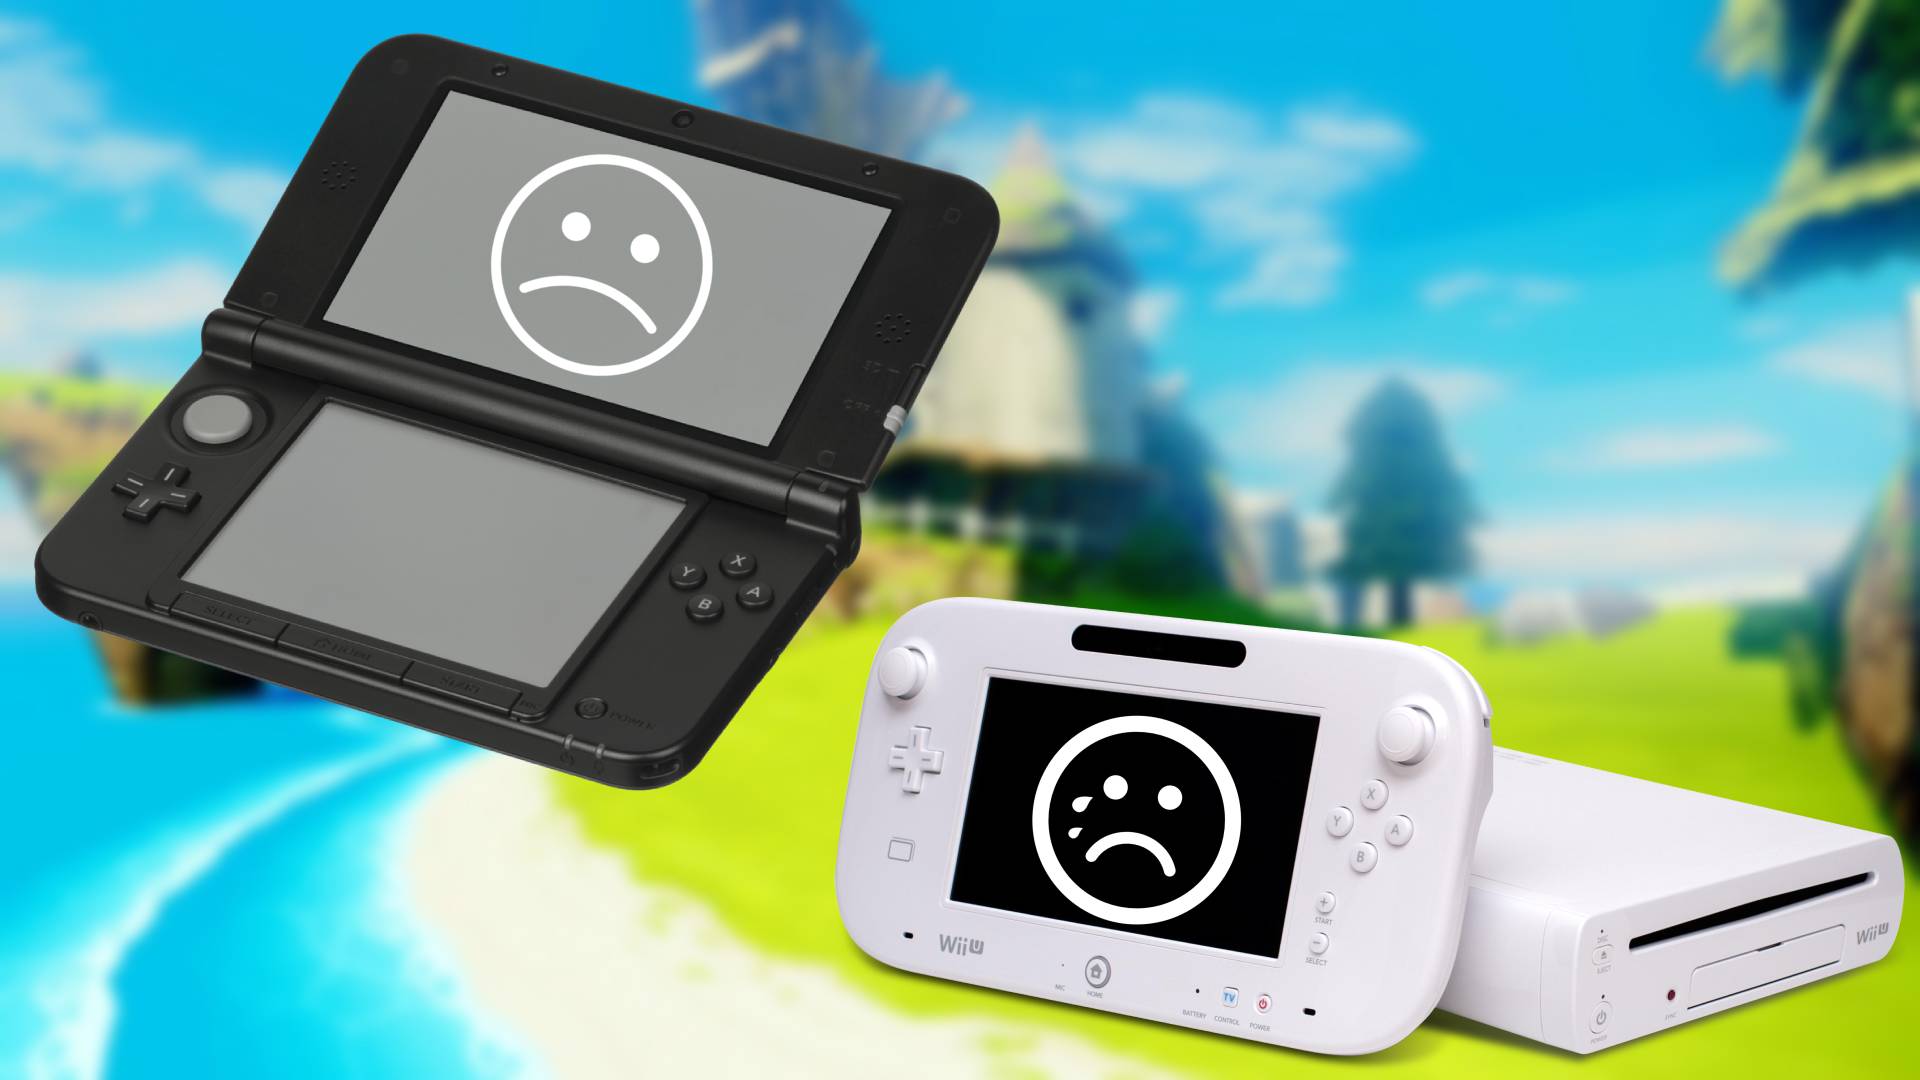 The Online Store for Wii U and Nintendo 3DS Will Shut Down Next Year